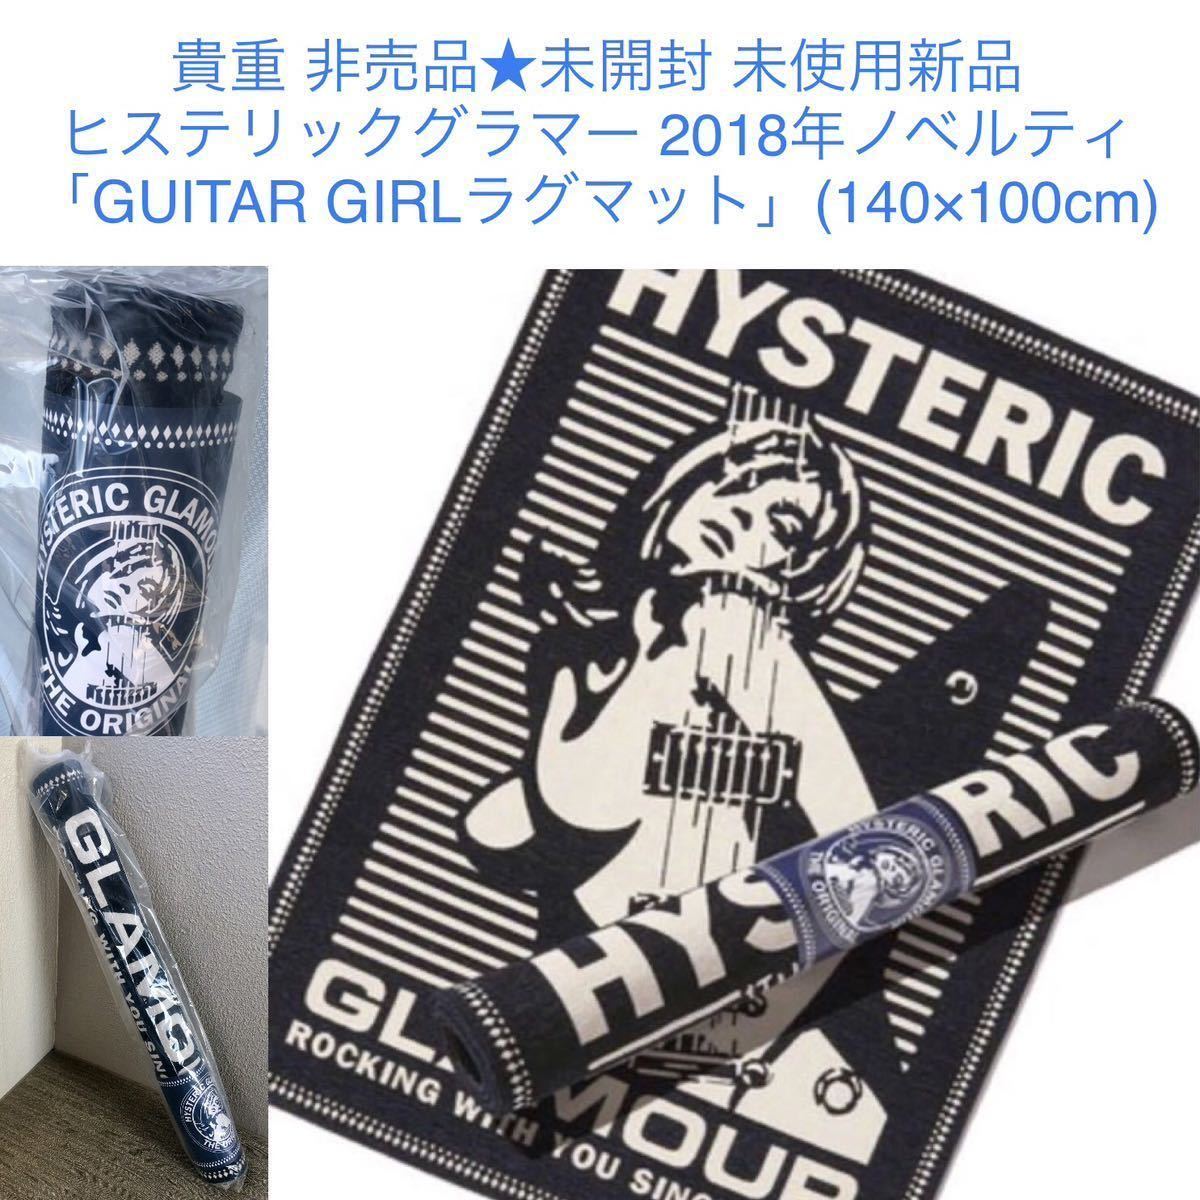  not for sale *GUITAR GIRL rug mat HYSTERIC GLAMOUR*2018 year Novelty unopened unused new goods guitar girl interior Hysteric Glamour 